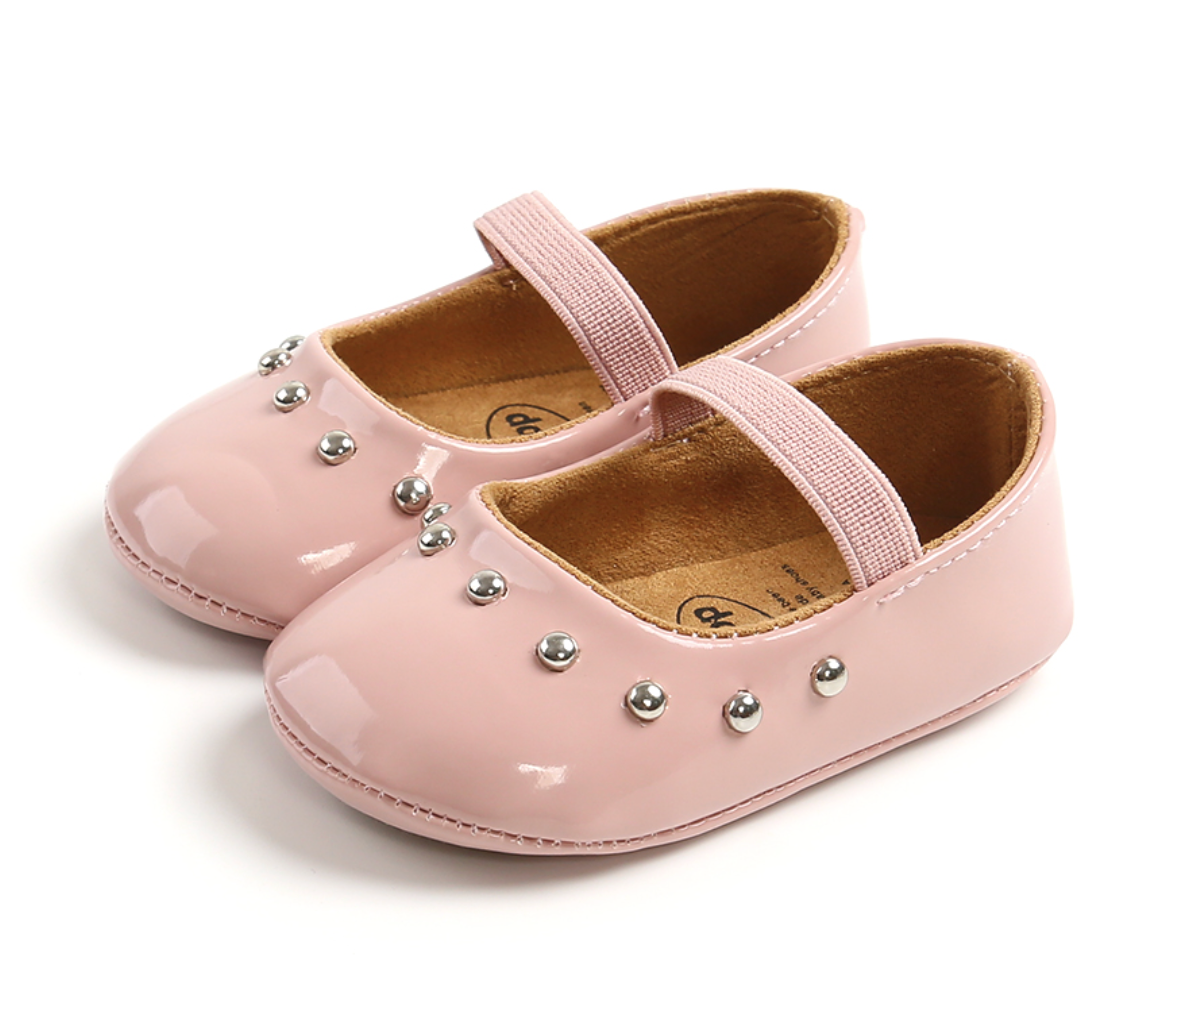 Cassidy Dress Shoes & Headbands Set in Pink